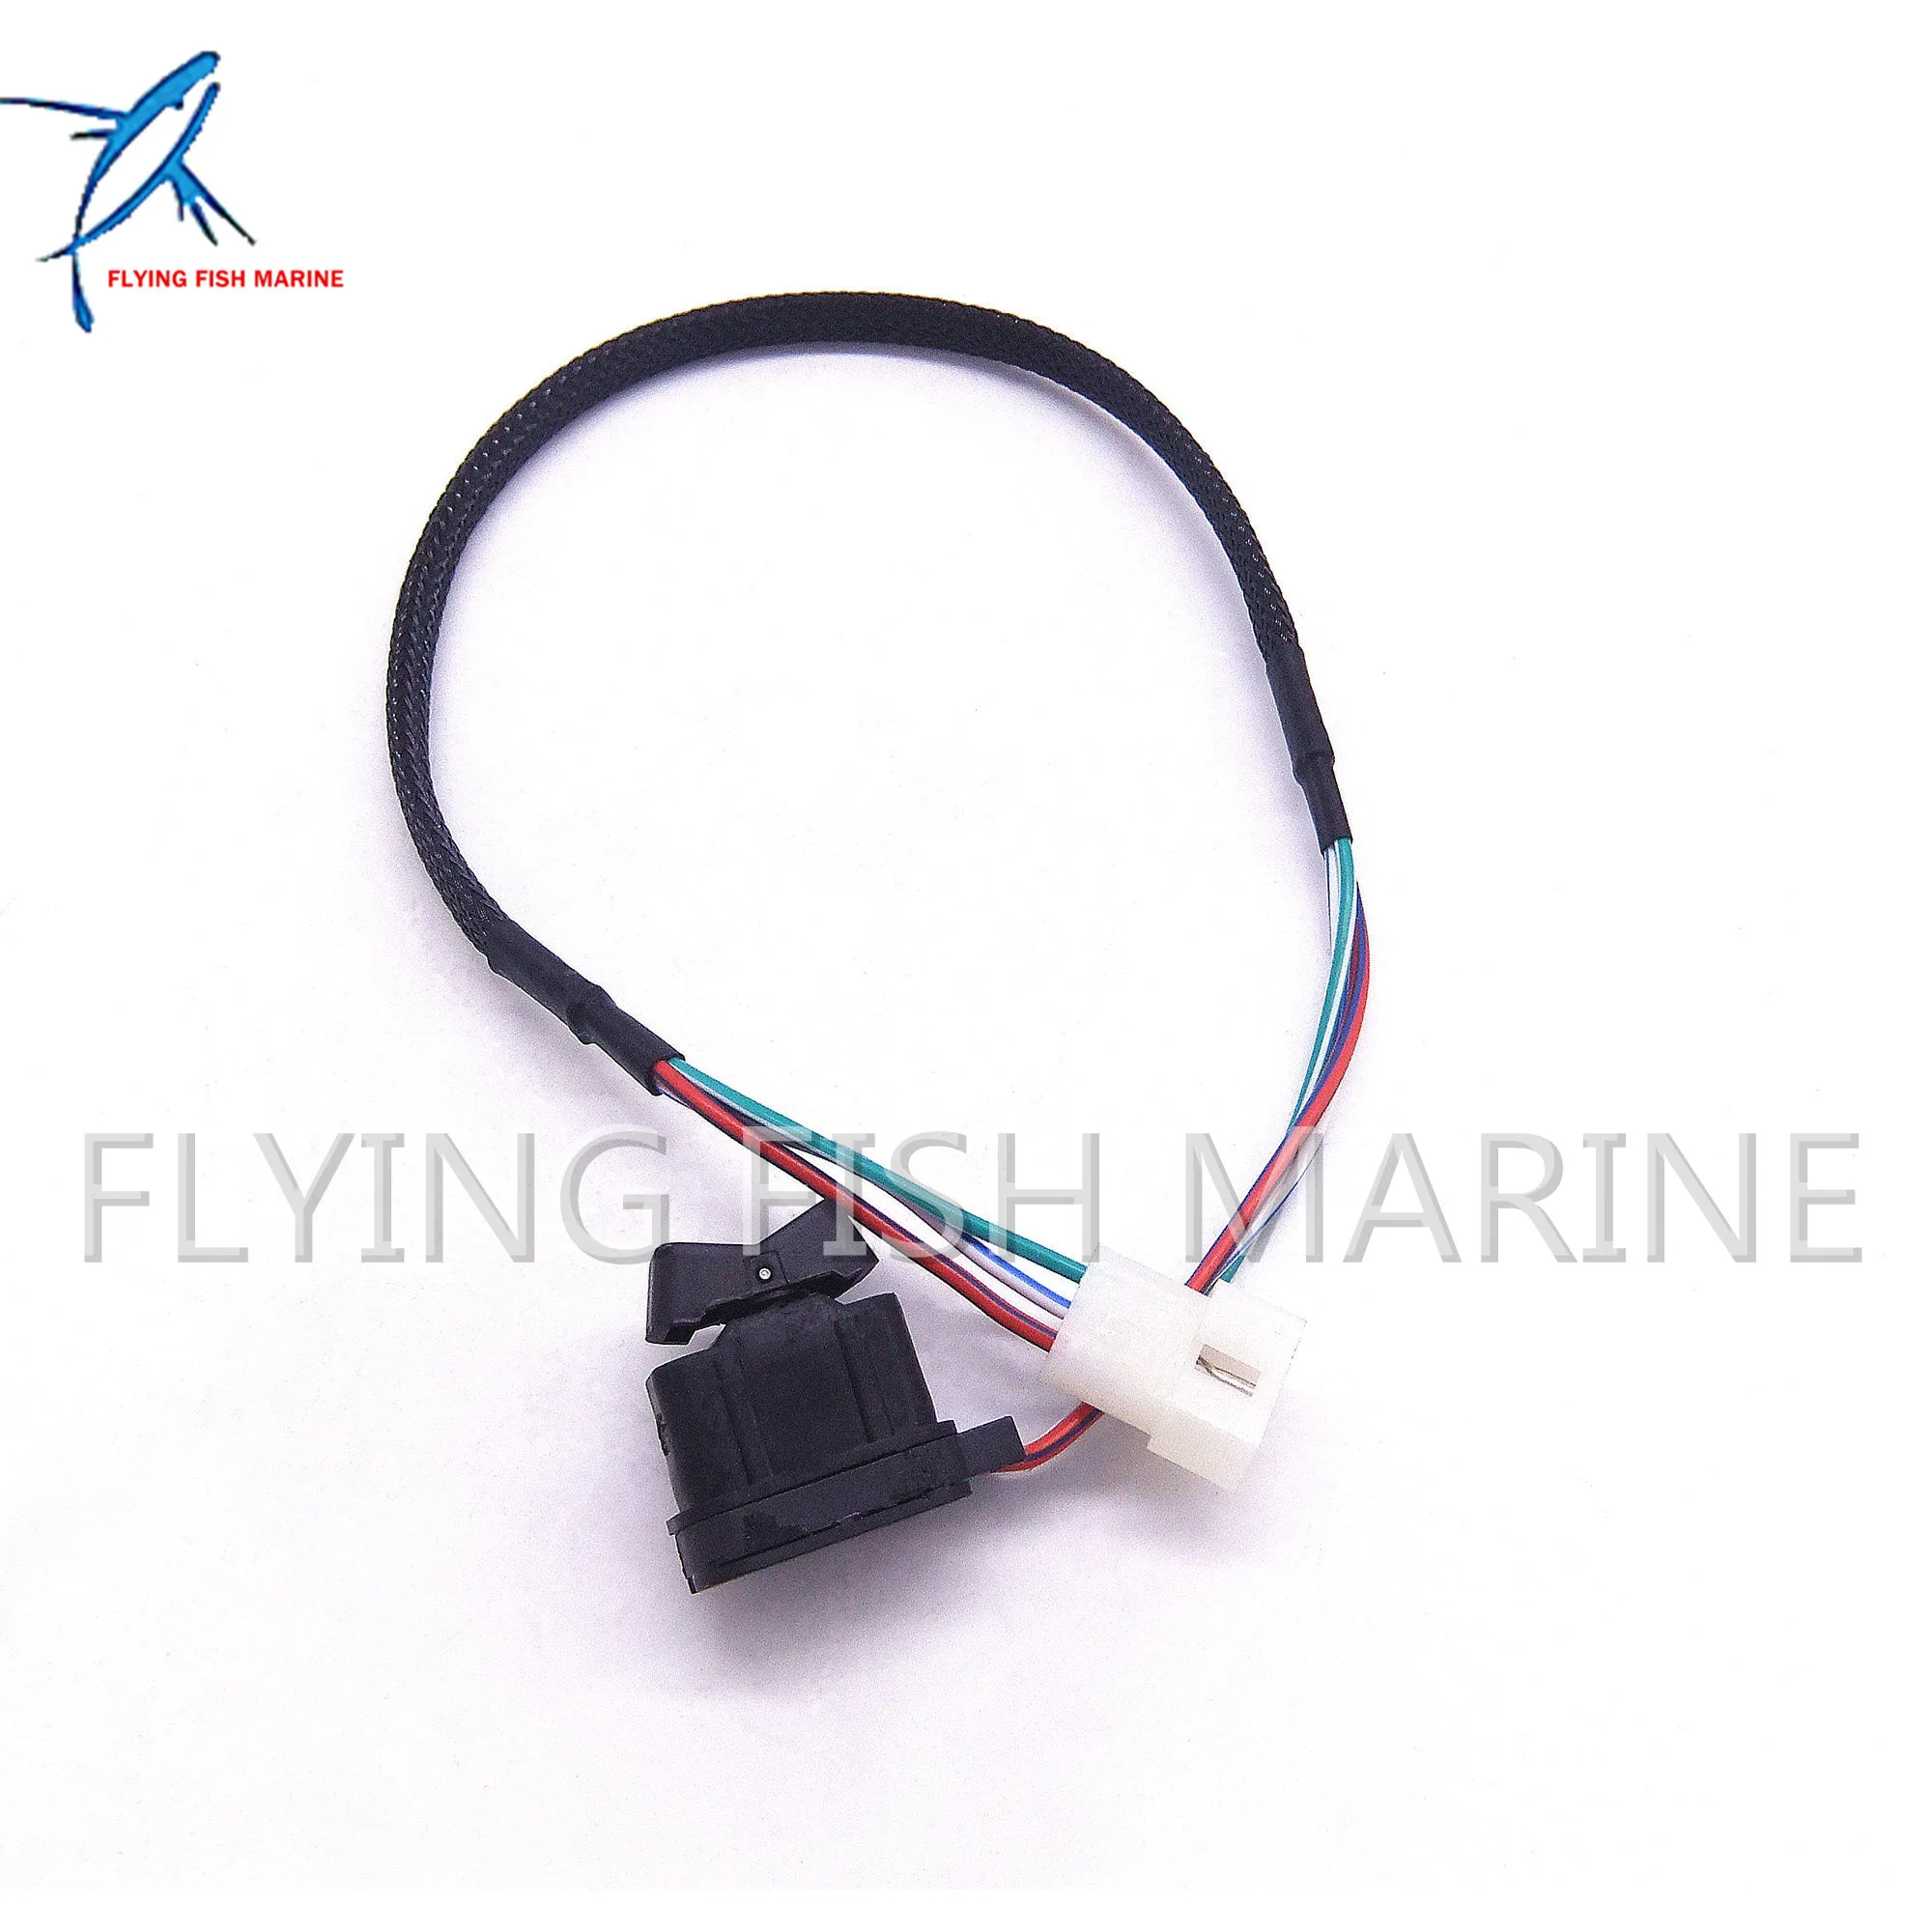 

87-859032T3 859032T 3 Trim & Tilt Switch & Harness For Mercury Outboard Motor Remote Control Box